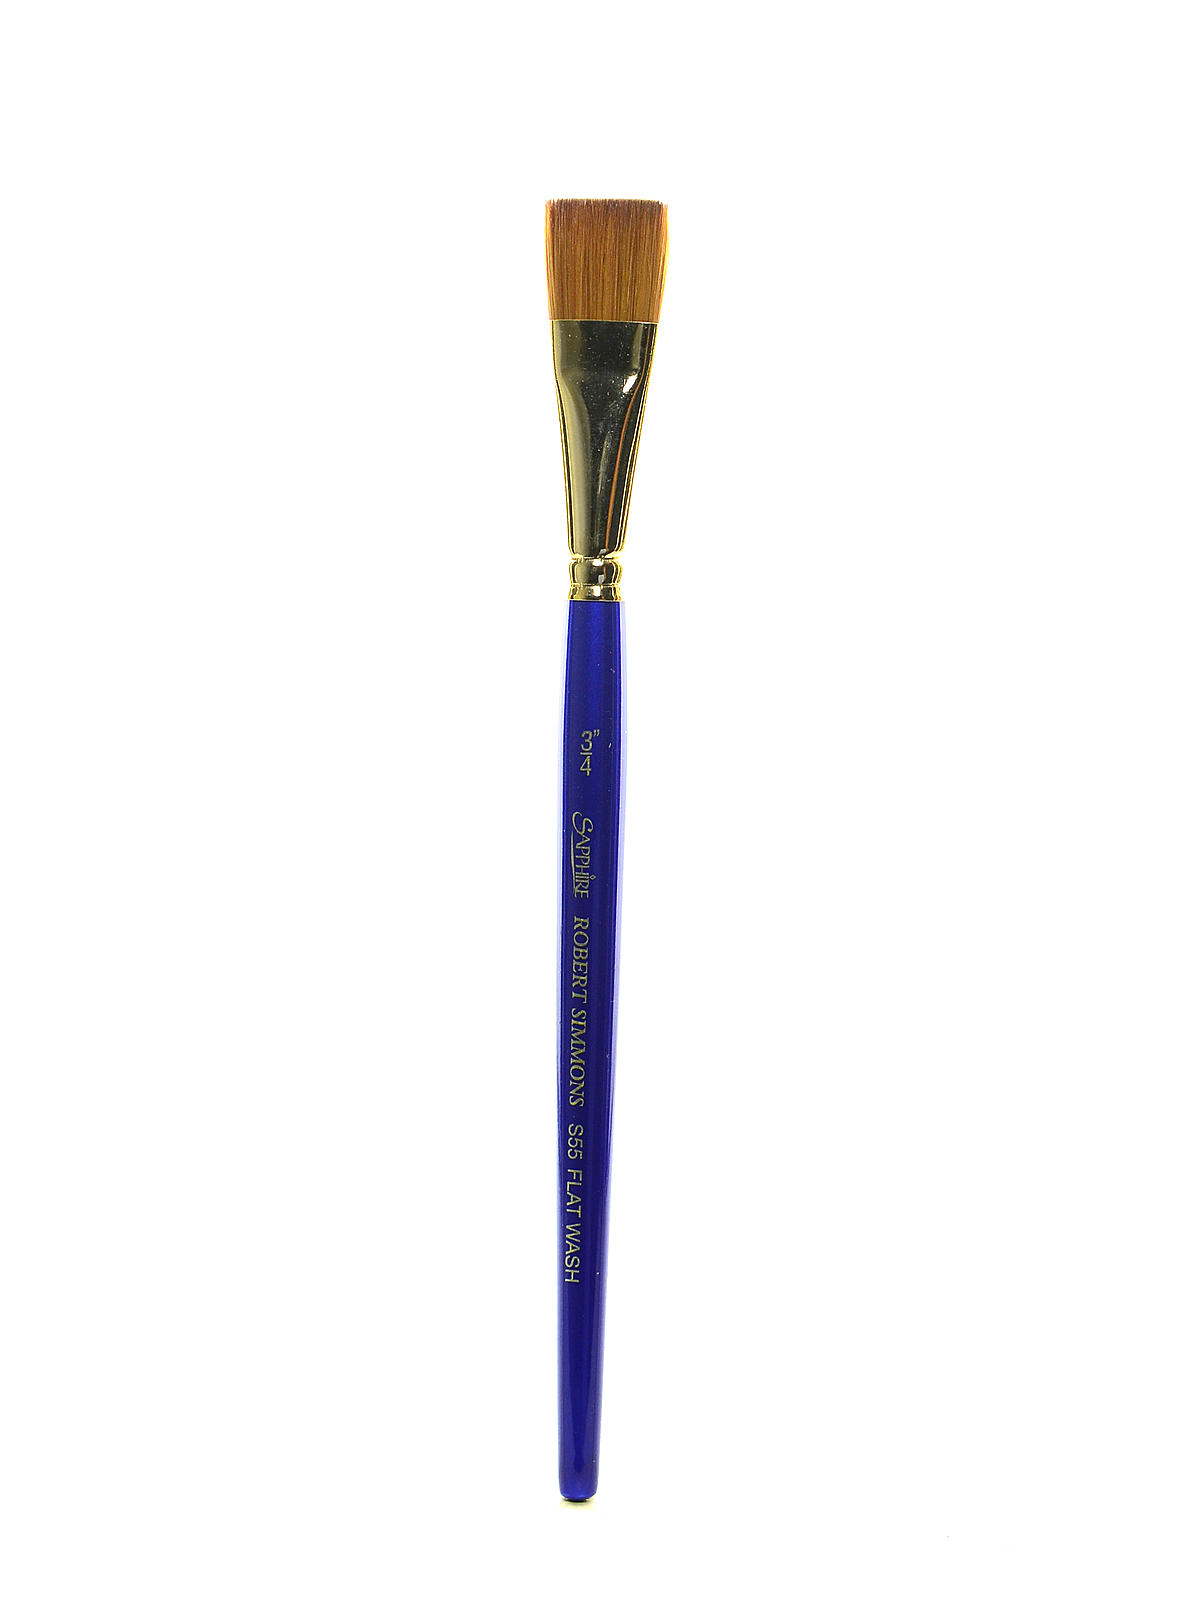 Sapphire Series Synthetic Brushes Short Handle 3 4 In. Flat Wash S55